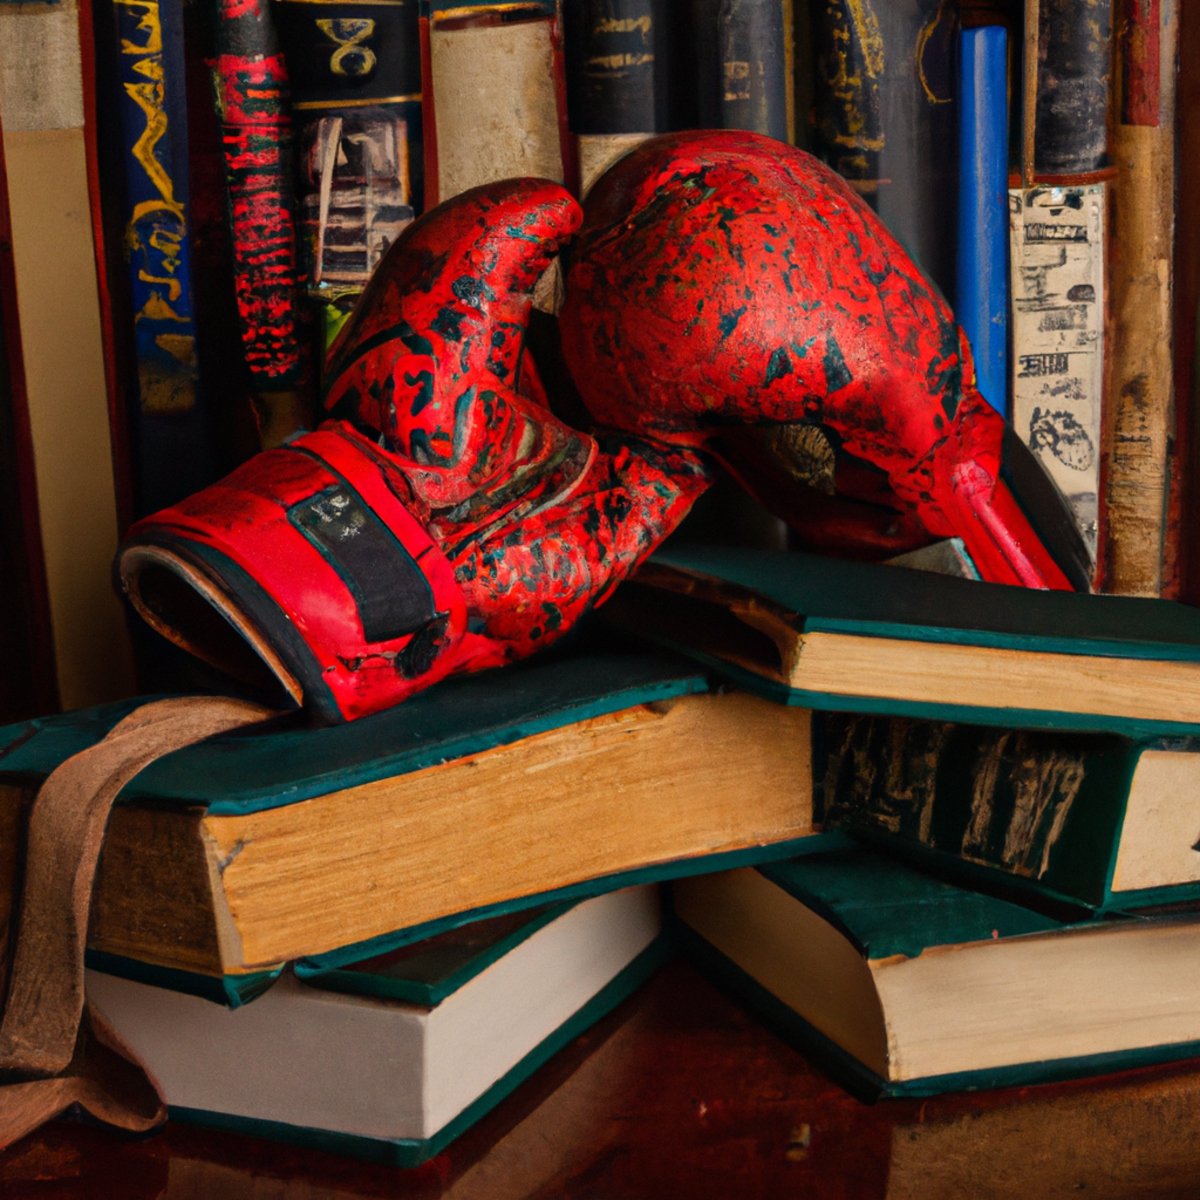 Resilient boxing gloves, empowering books, hopeful flowers, and a flickering candle symbolize strength, knowledge, beauty, and unwavering spirit-Leopard Syndrome